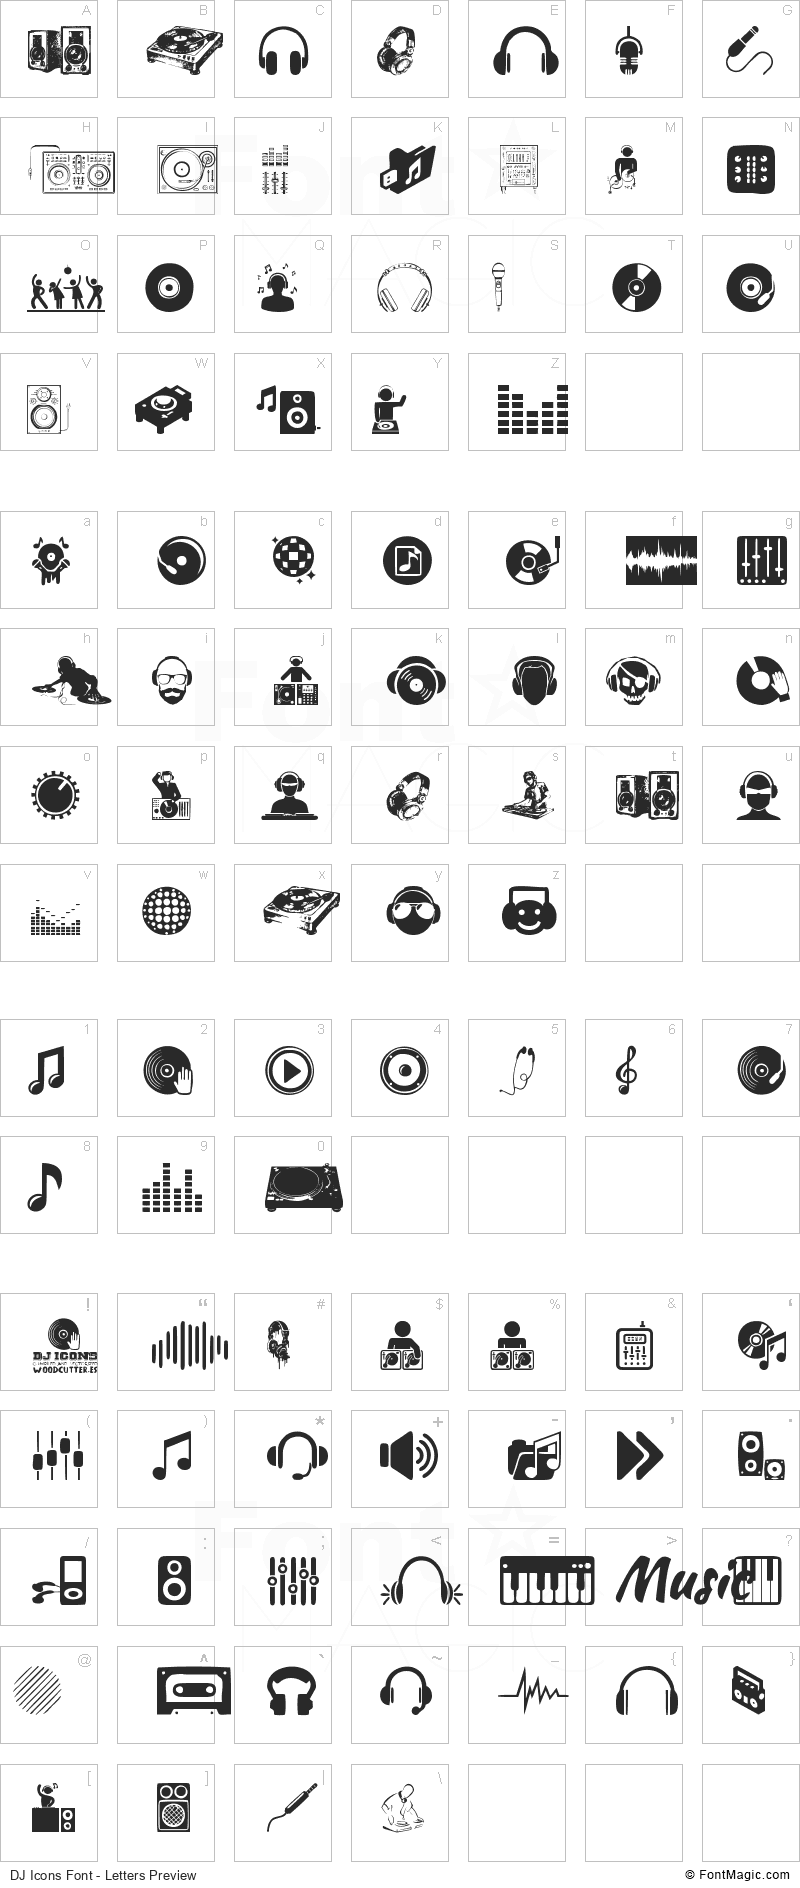 DJ Icons Font - All Latters Preview Chart